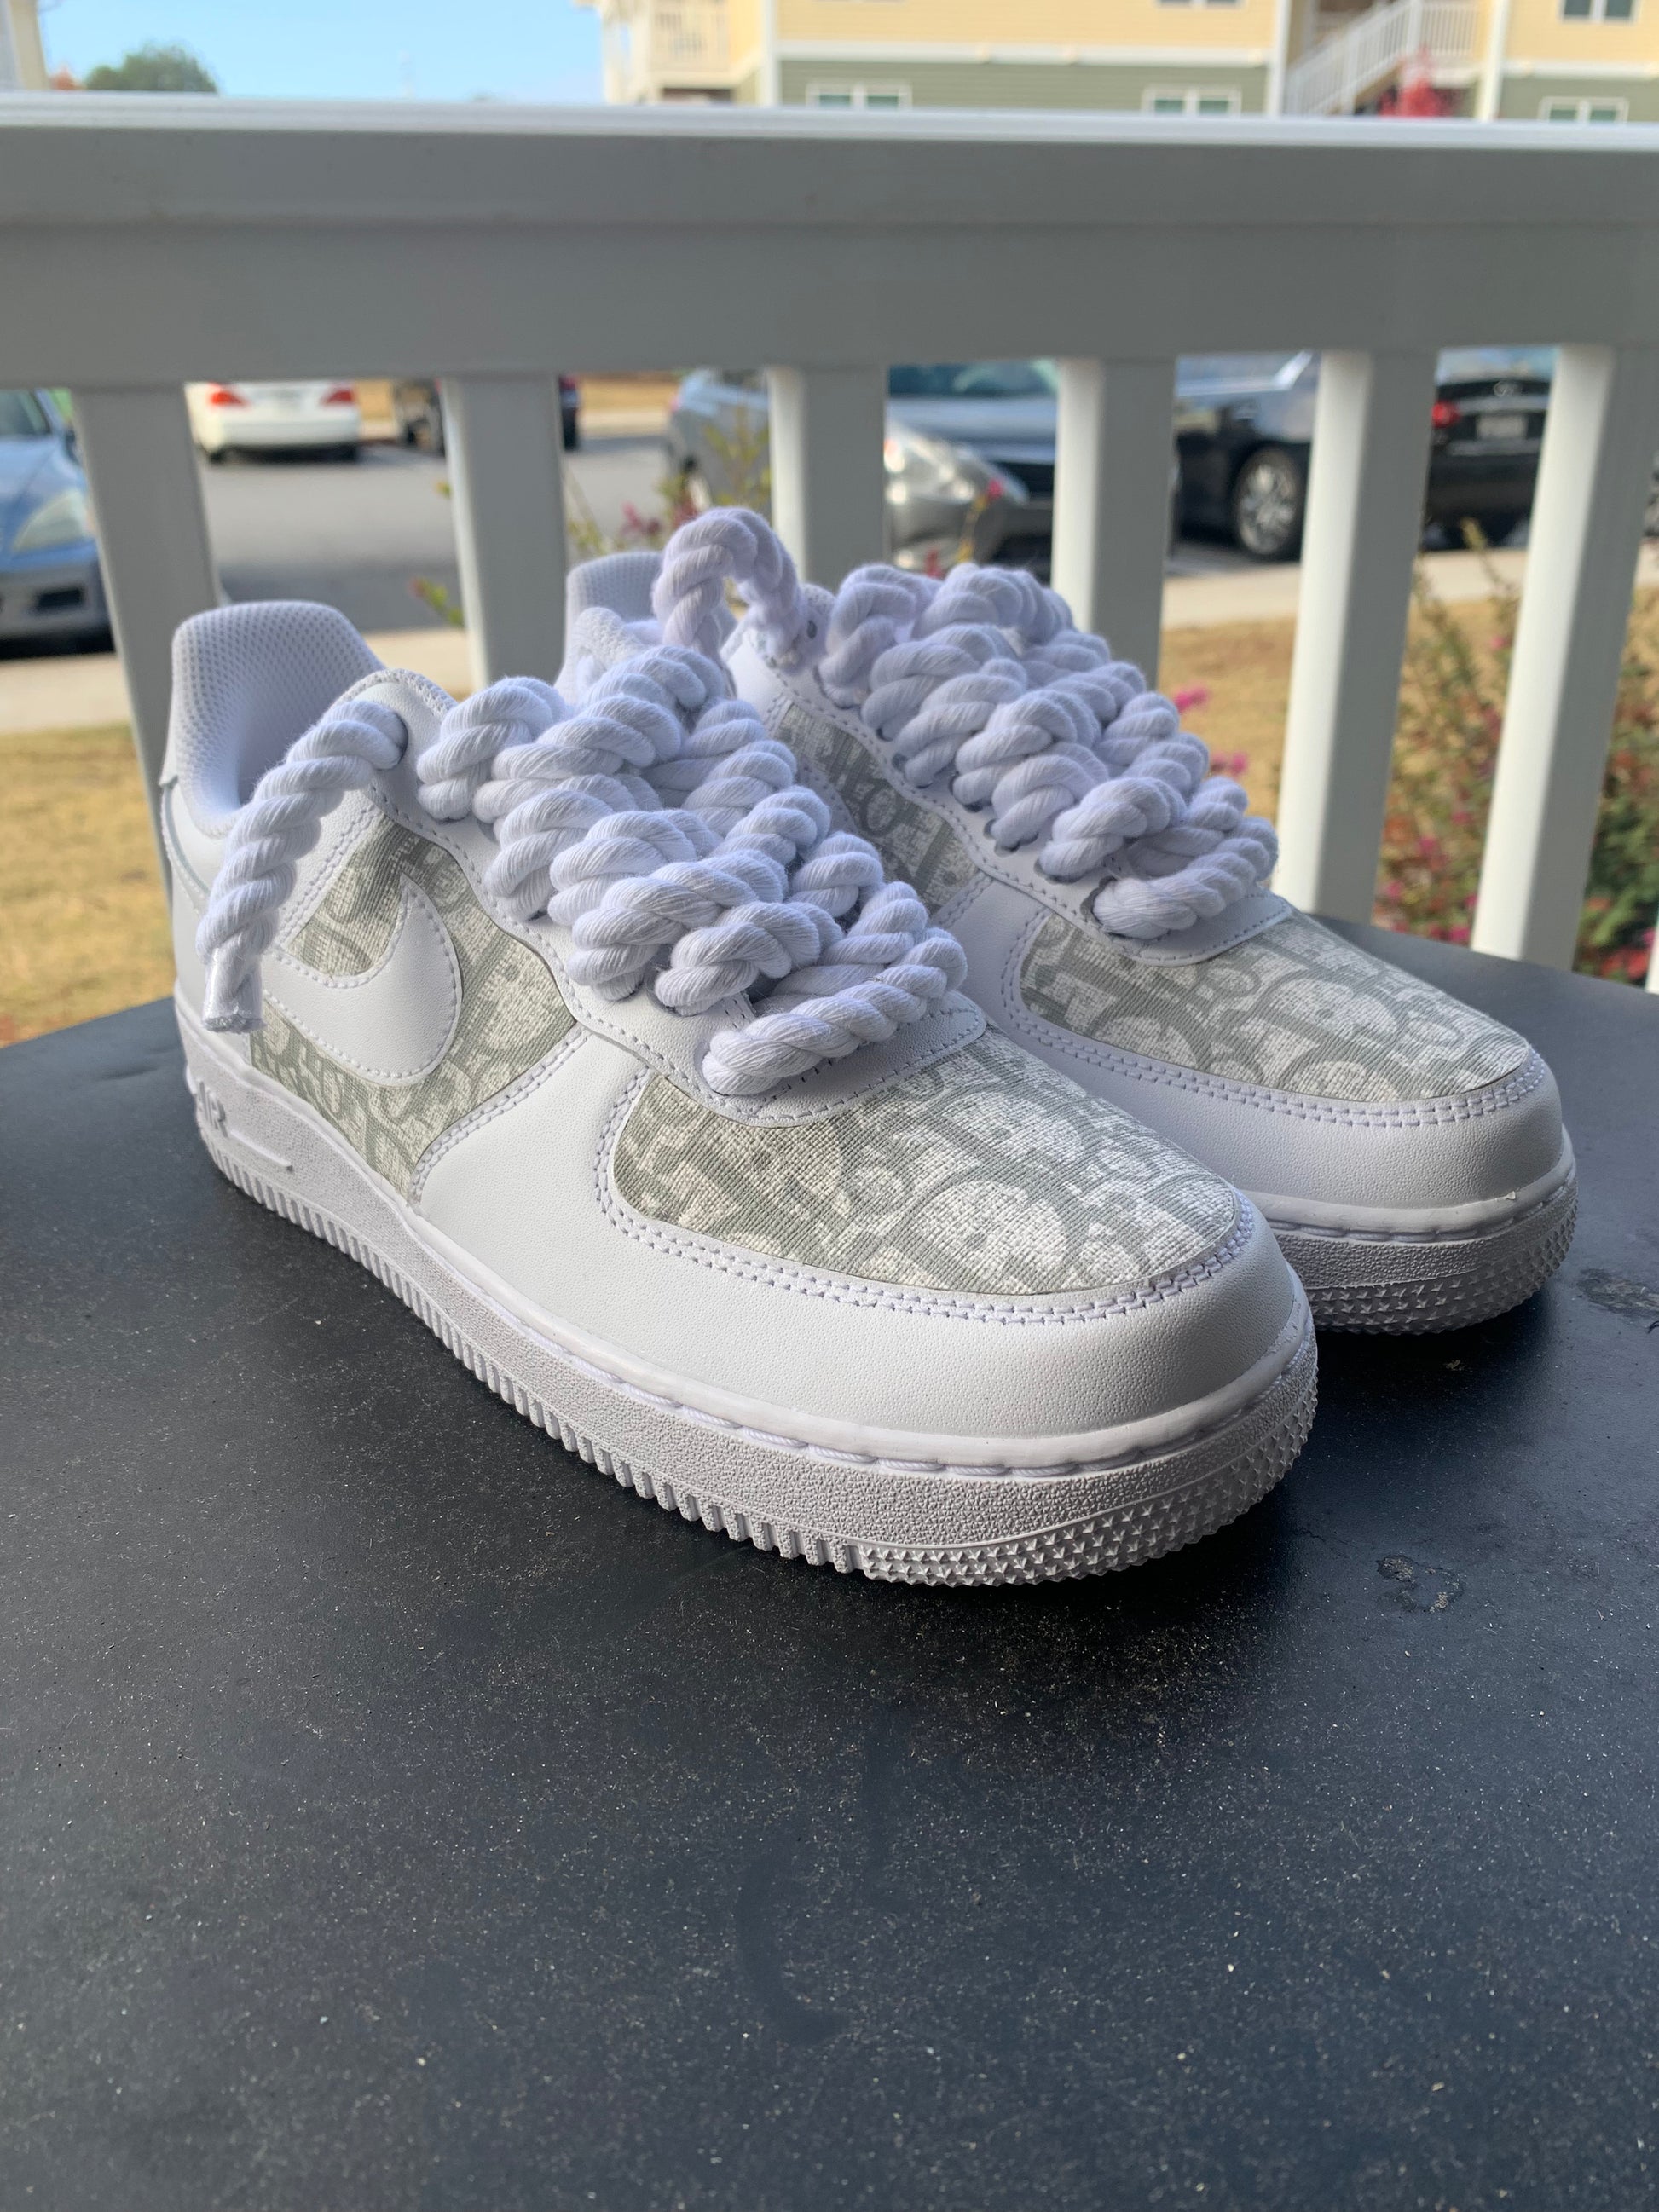 Custom Louis Vuitton Air Force ones￼ With rope laces￼ #custom